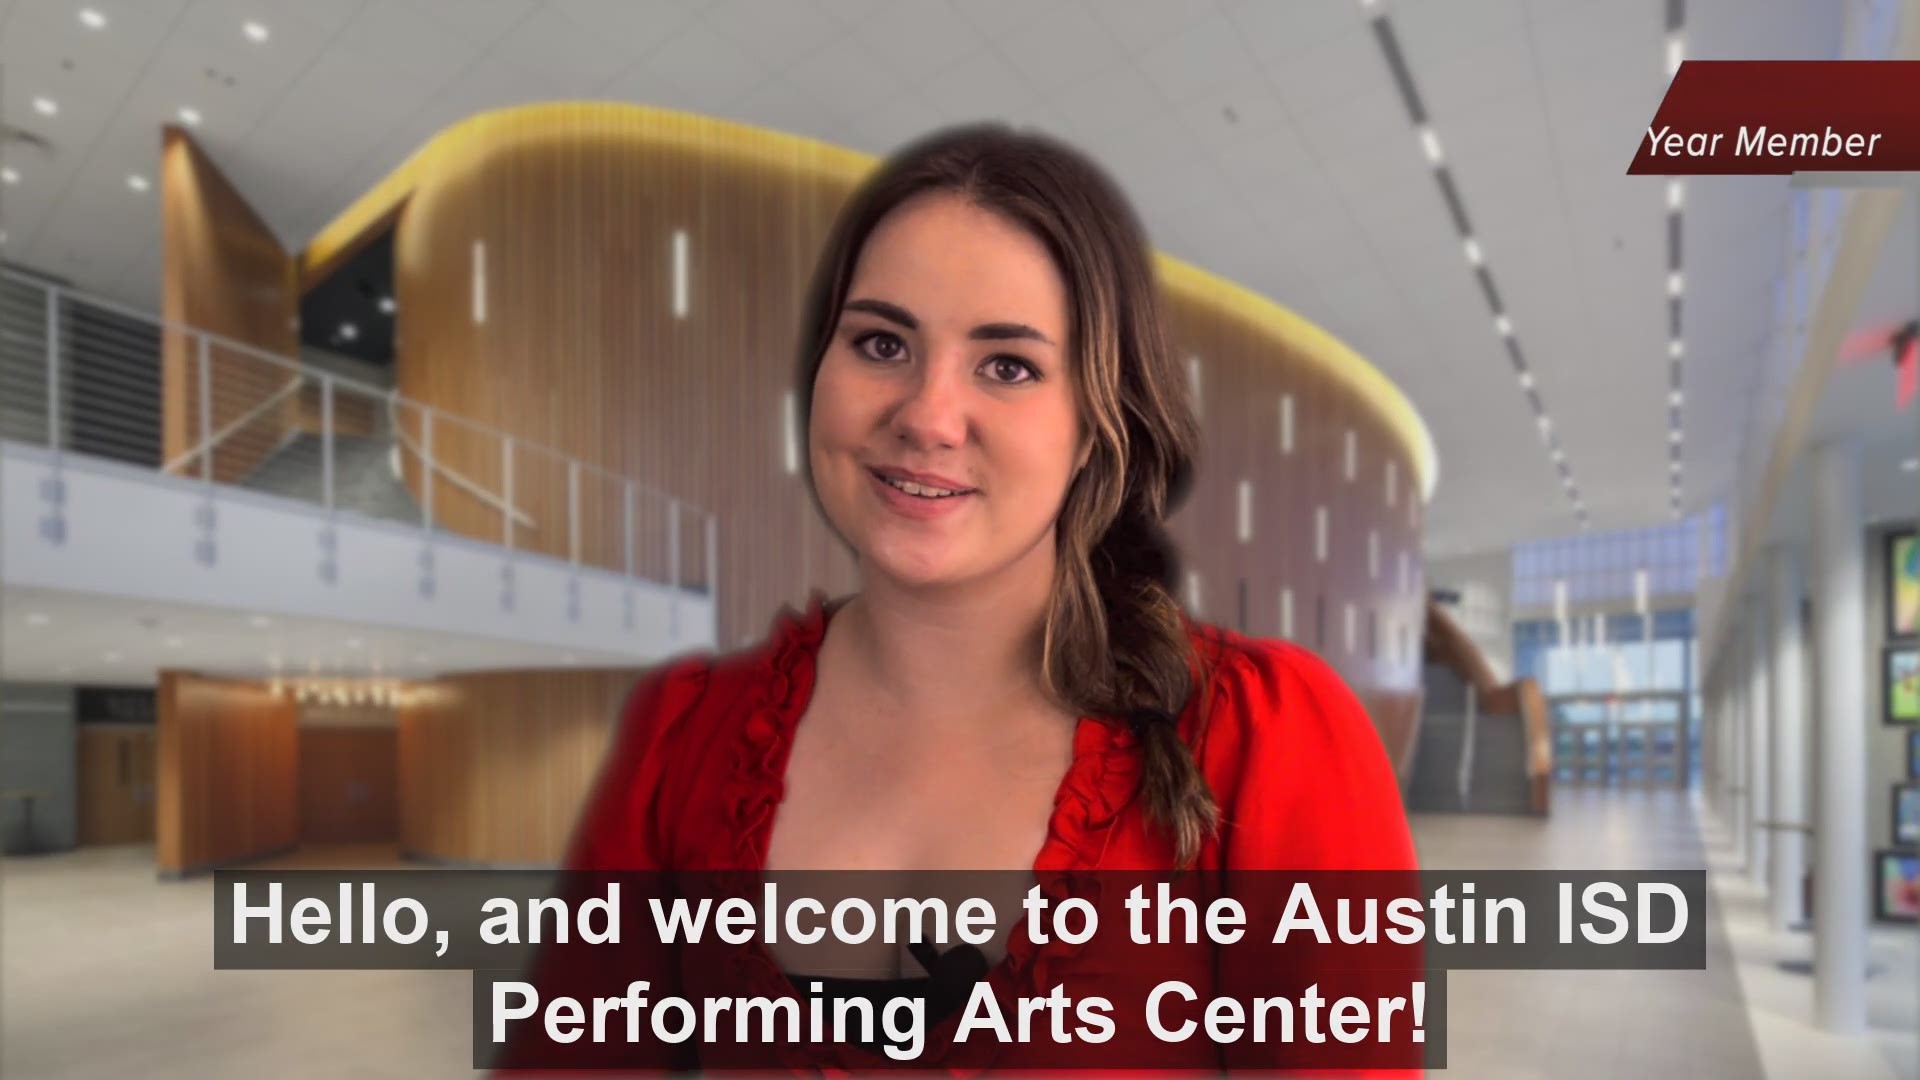 Video courtesy of the Austin ISD Visual and Performing Arts Department.